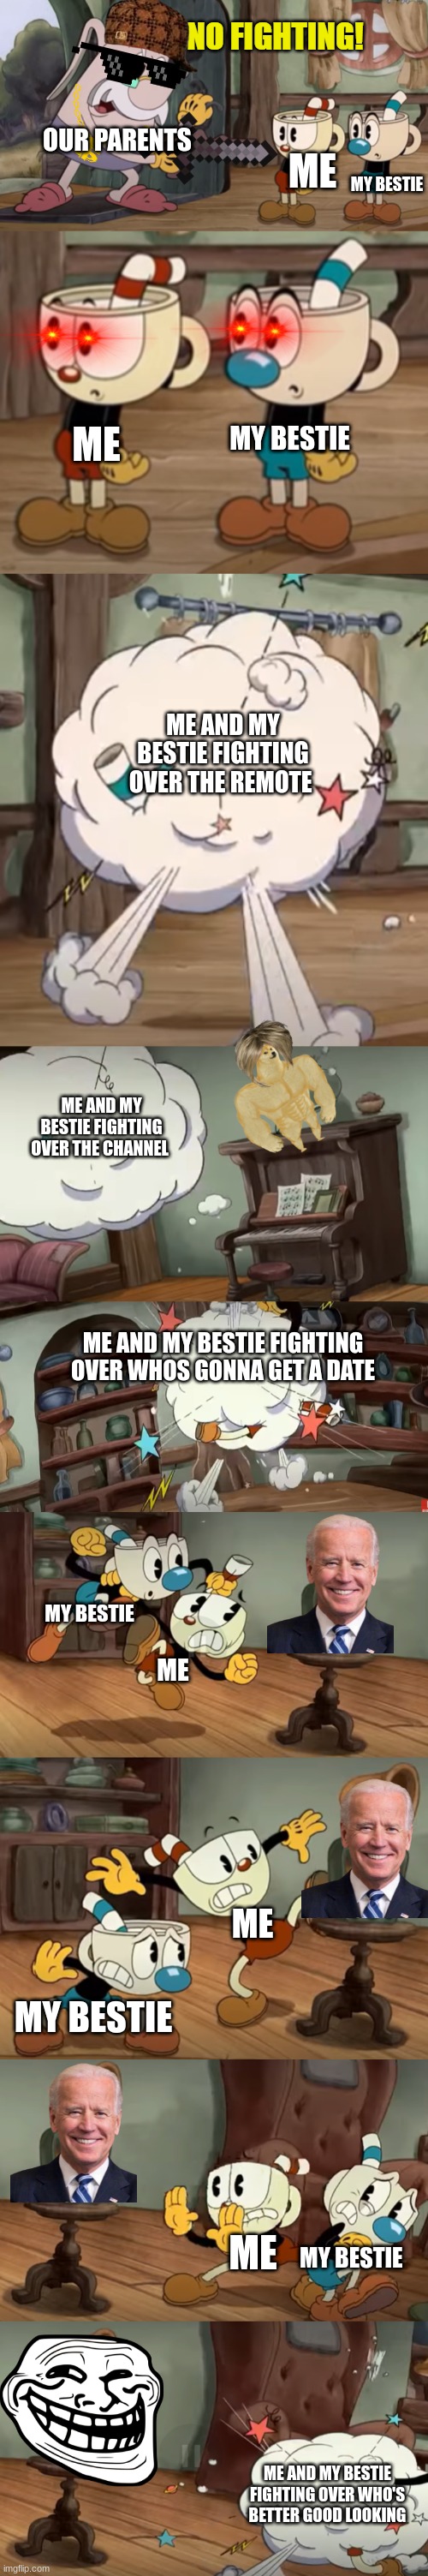 How ridiculous me and my bestie's arguments are: | OUR PARENTS; ME; MY BESTIE; MY BESTIE; ME; ME AND MY BESTIE FIGHTING OVER THE REMOTE; ME AND MY BESTIE FIGHTING OVER THE CHANNEL; ME AND MY BESTIE FIGHTING OVER WHOS GONNA GET A DATE; MY BESTIE; ME; ME; MY BESTIE; ME; MY BESTIE; ME AND MY BESTIE FIGHTING OVER WHO'S BETTER GOOD LOOKING | image tagged in funny memes | made w/ Imgflip meme maker